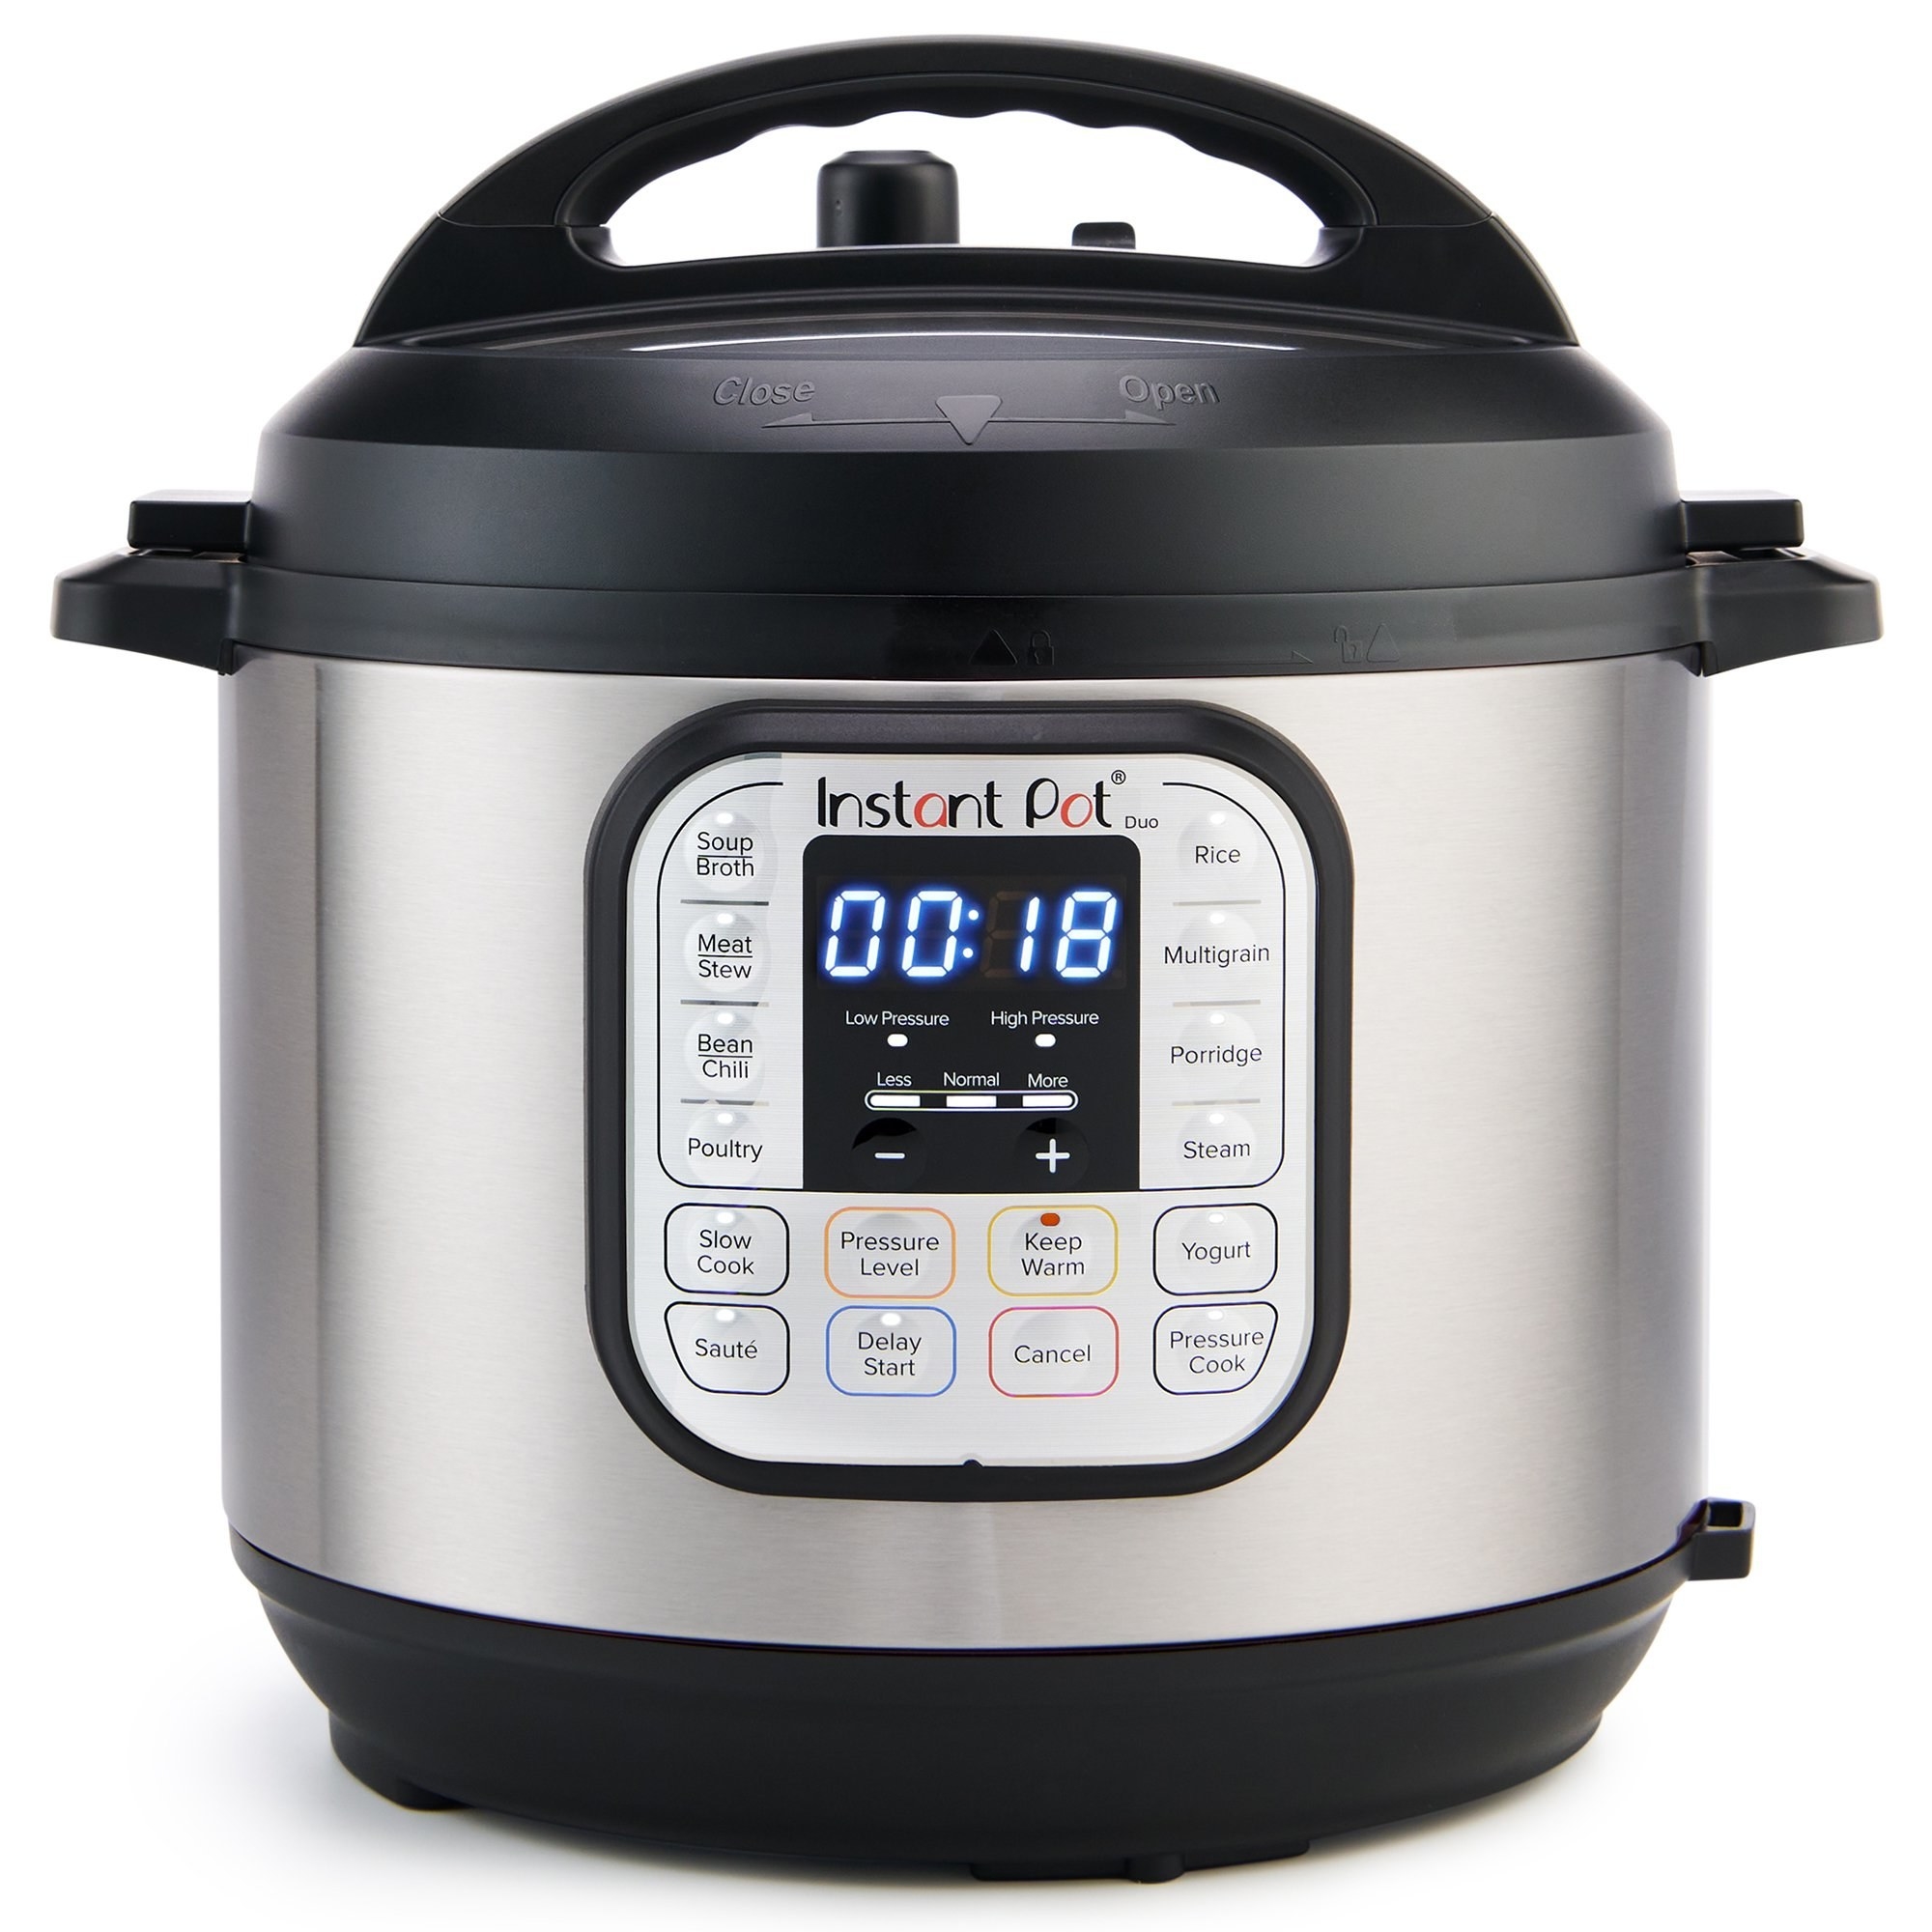 Black and stainless steel Instant Pot